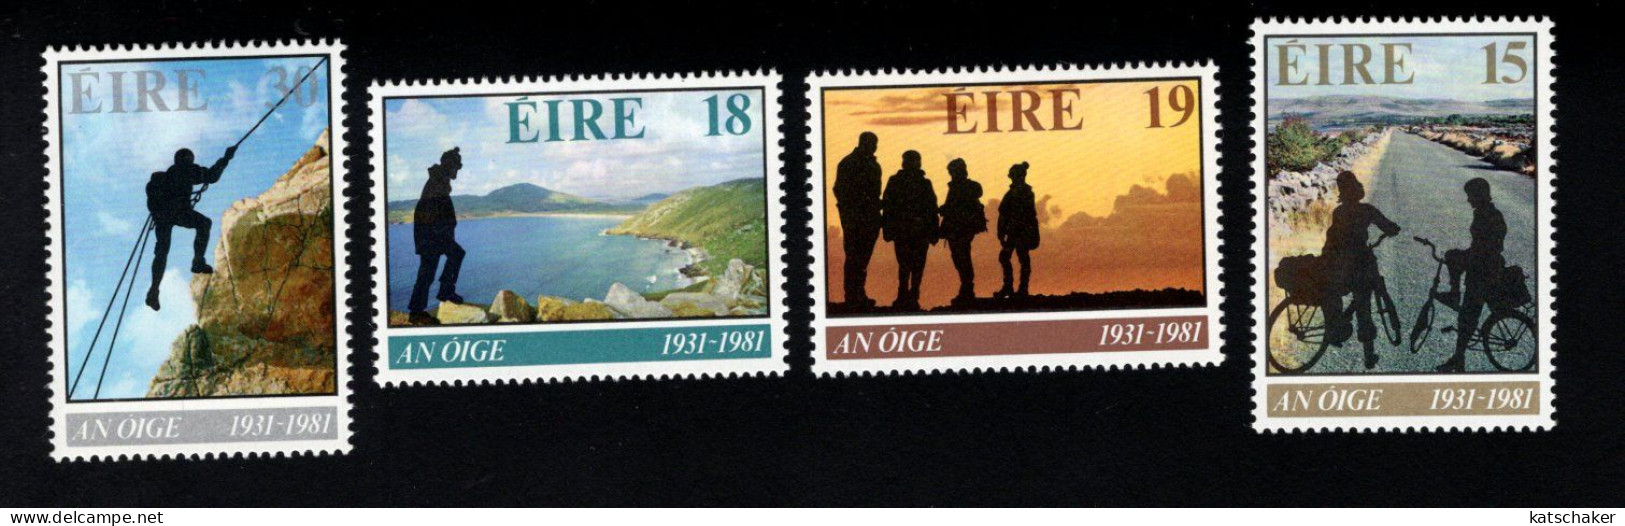 2002490501 1981 SCOTT 498 501  (XX) POSTFRIS  MINT NEVER HINGED - YOUTH HOSTEL ASSN.  50TH ANNIV - Unused Stamps